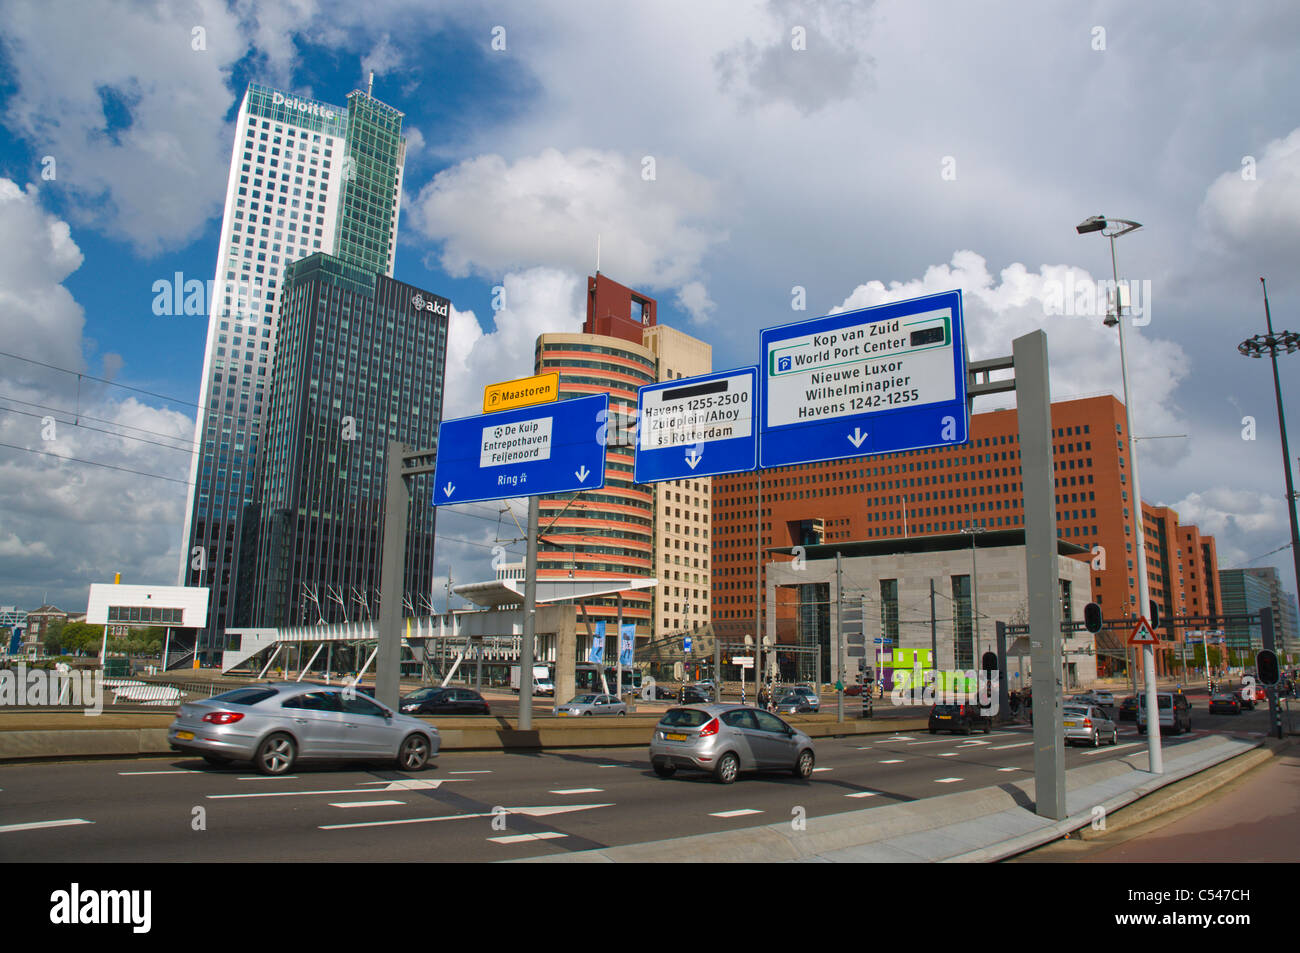 Posthumalaan street Kop van Zuid district Rotterdam the province of South Holland the Netherlands Europe Stock Photo